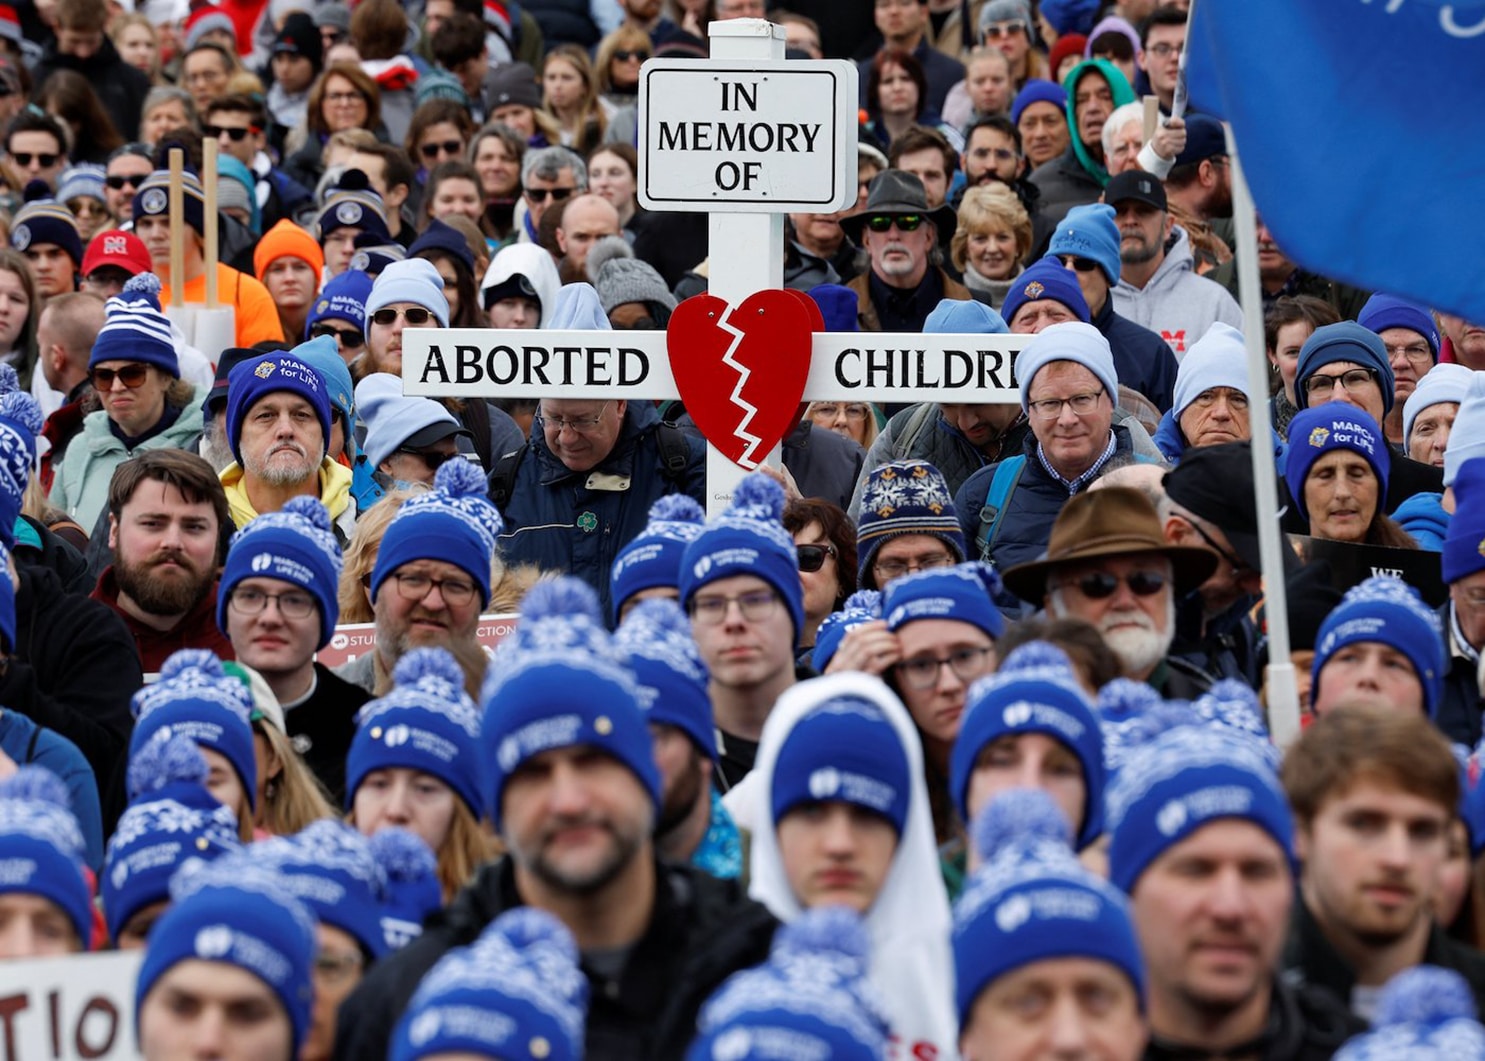 2023 pro-life issues